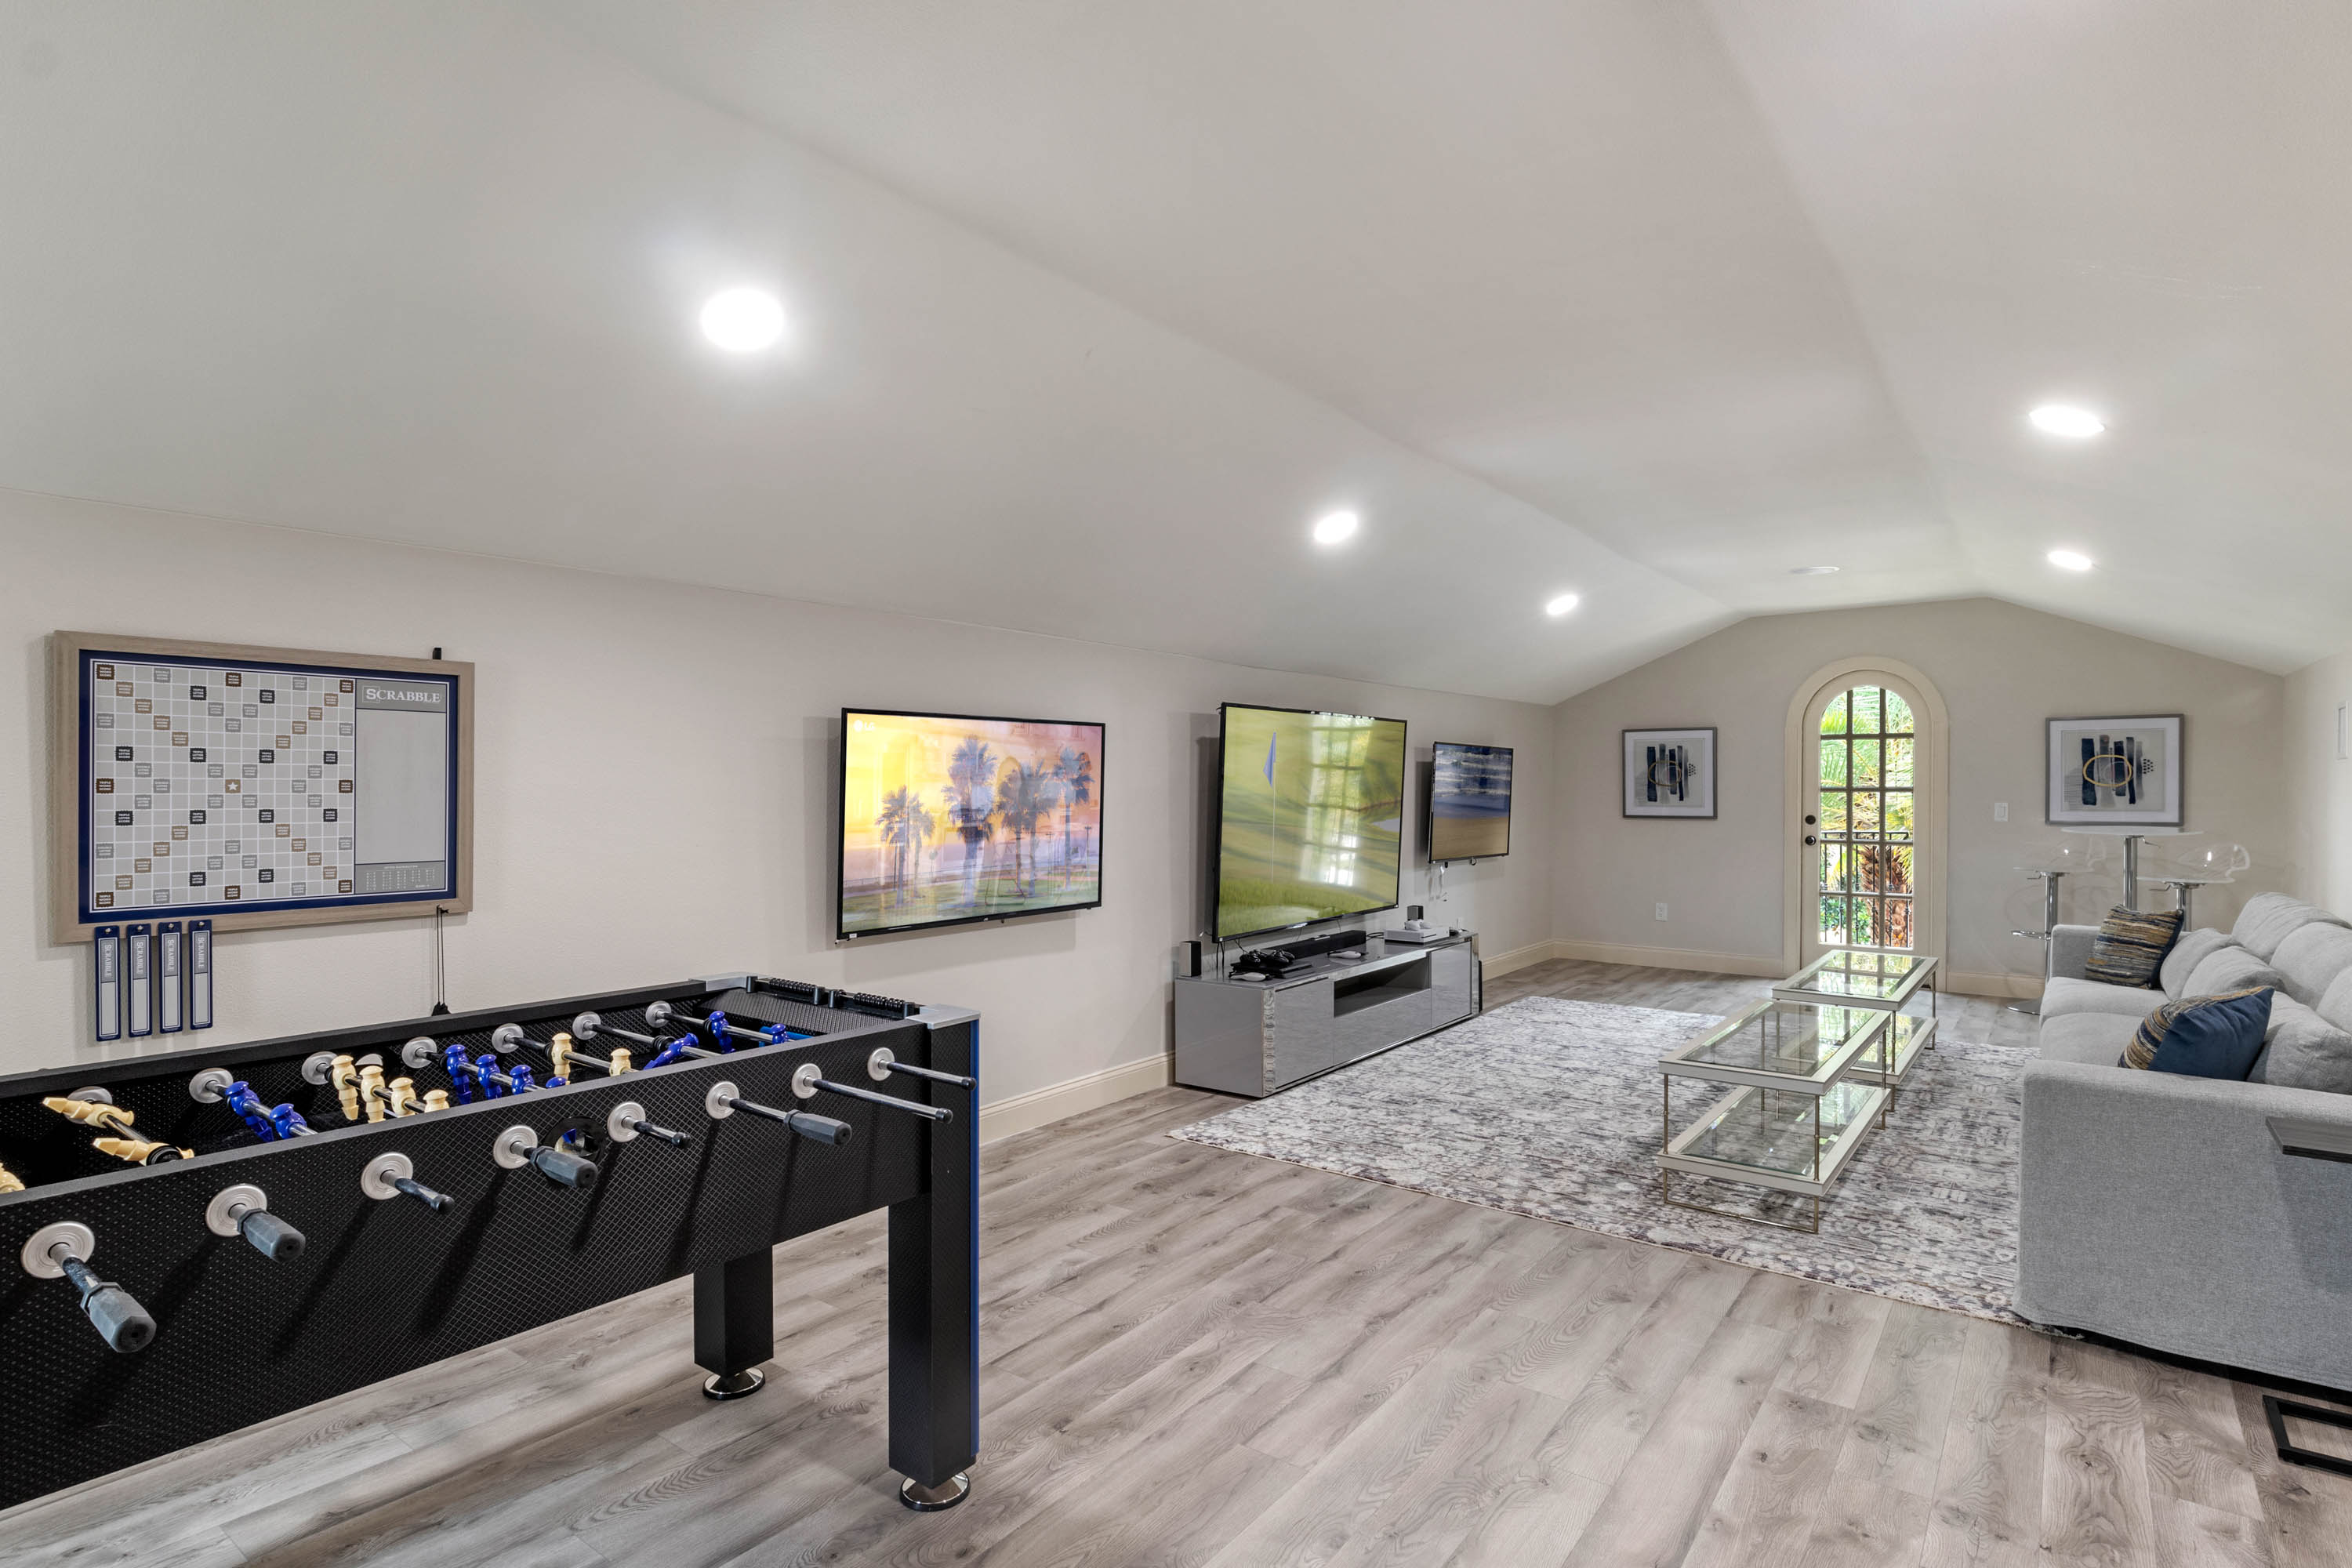 Family friendly gaming room